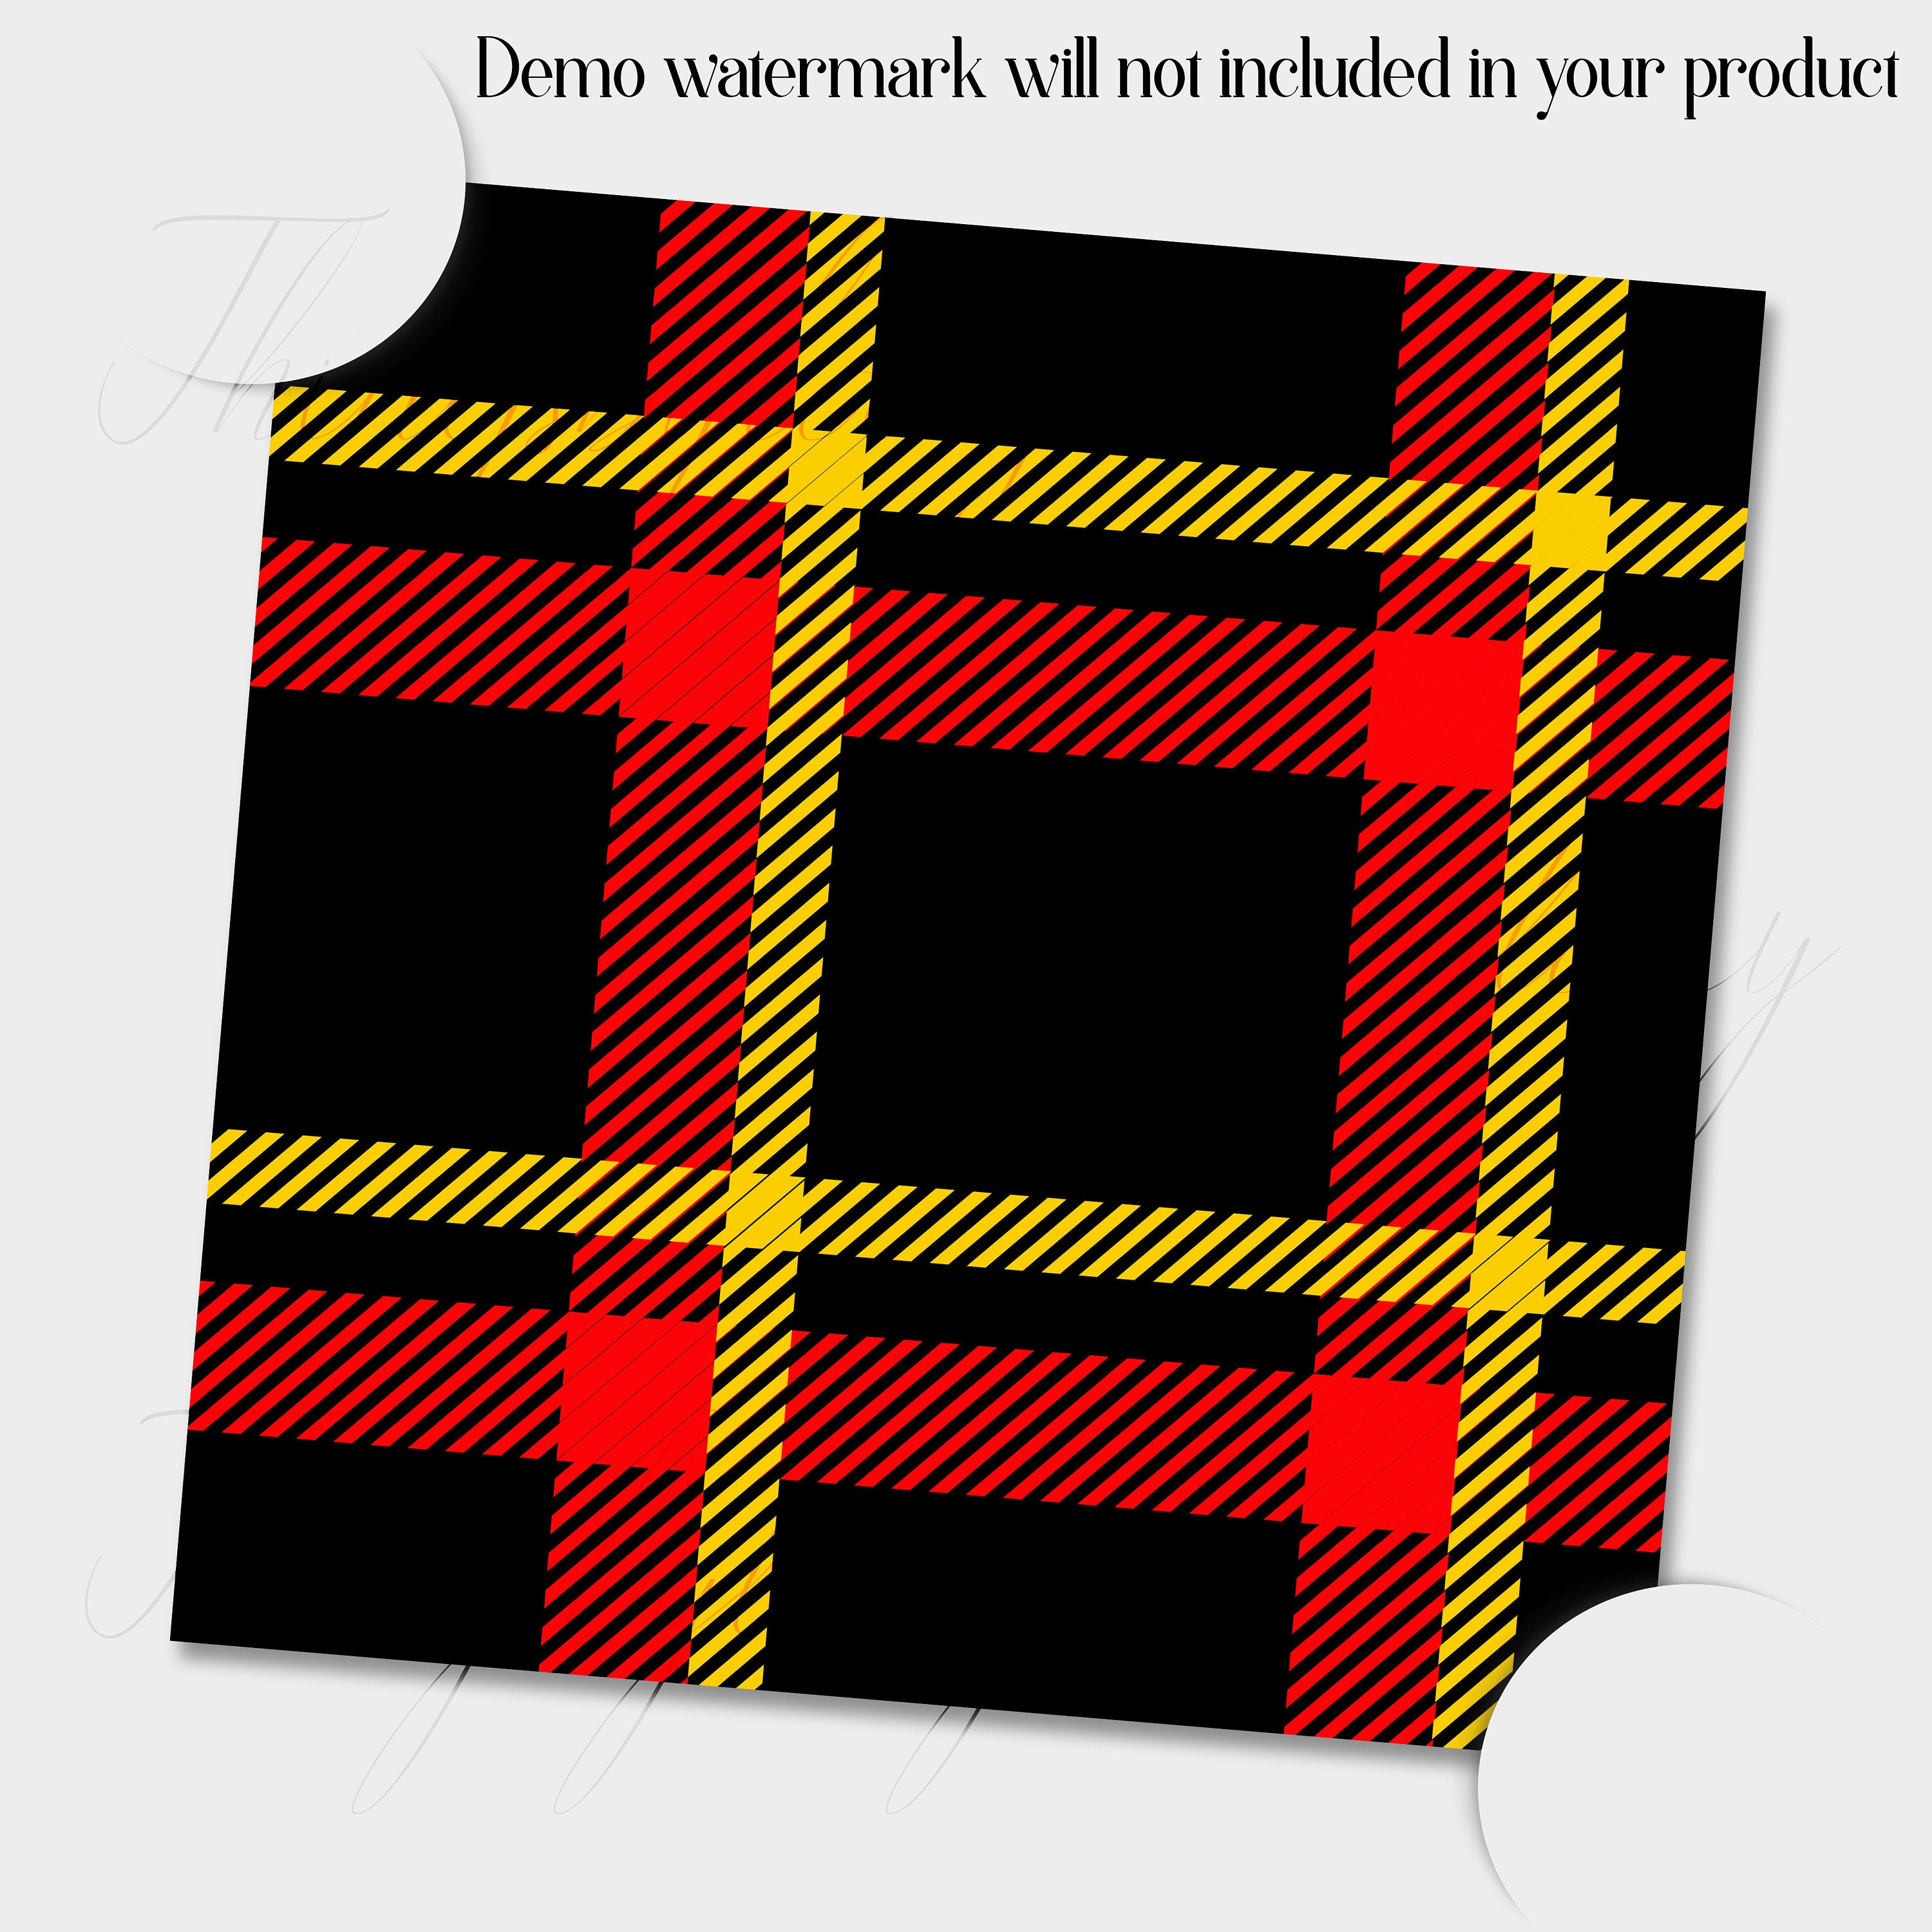 24 Red, Black, Yellow Plaid Digital Papers in 12inch 300 Dpi Instant Download, Scrapbook Papers, Tartan, Gingham, Check, Commercial Use